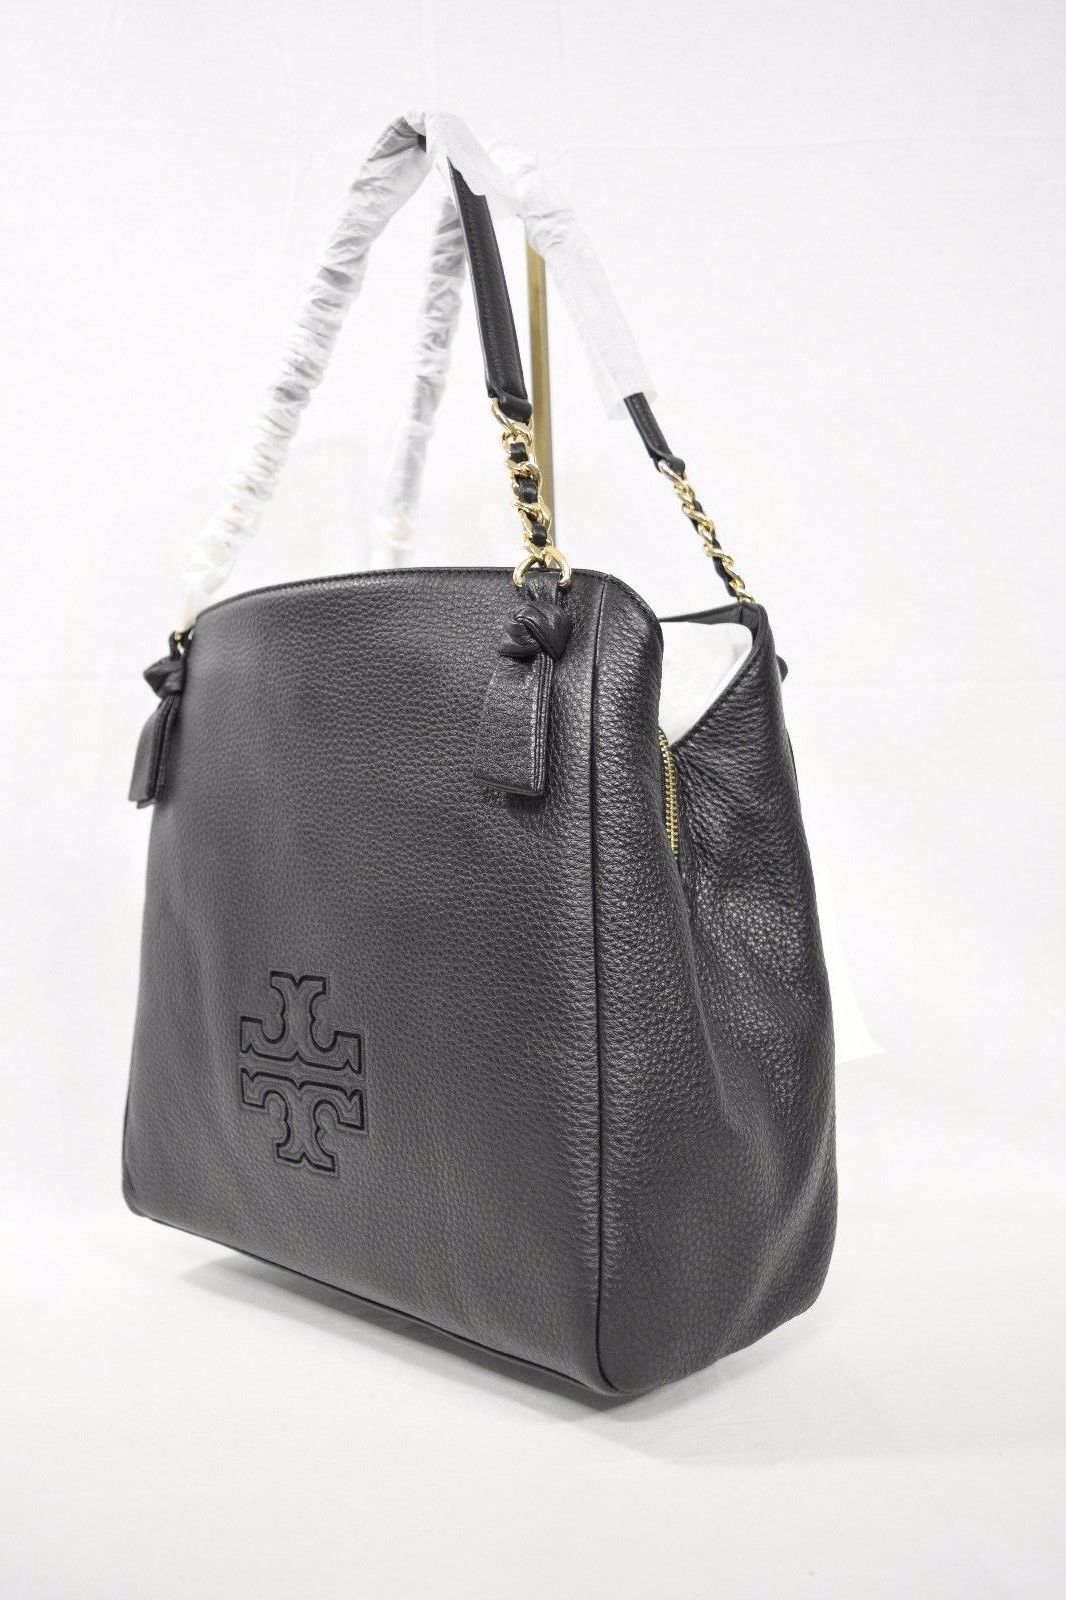 Primary image for NWT Tory Burch Harper Black Leather Center Zip Tote / Shoulder Bag